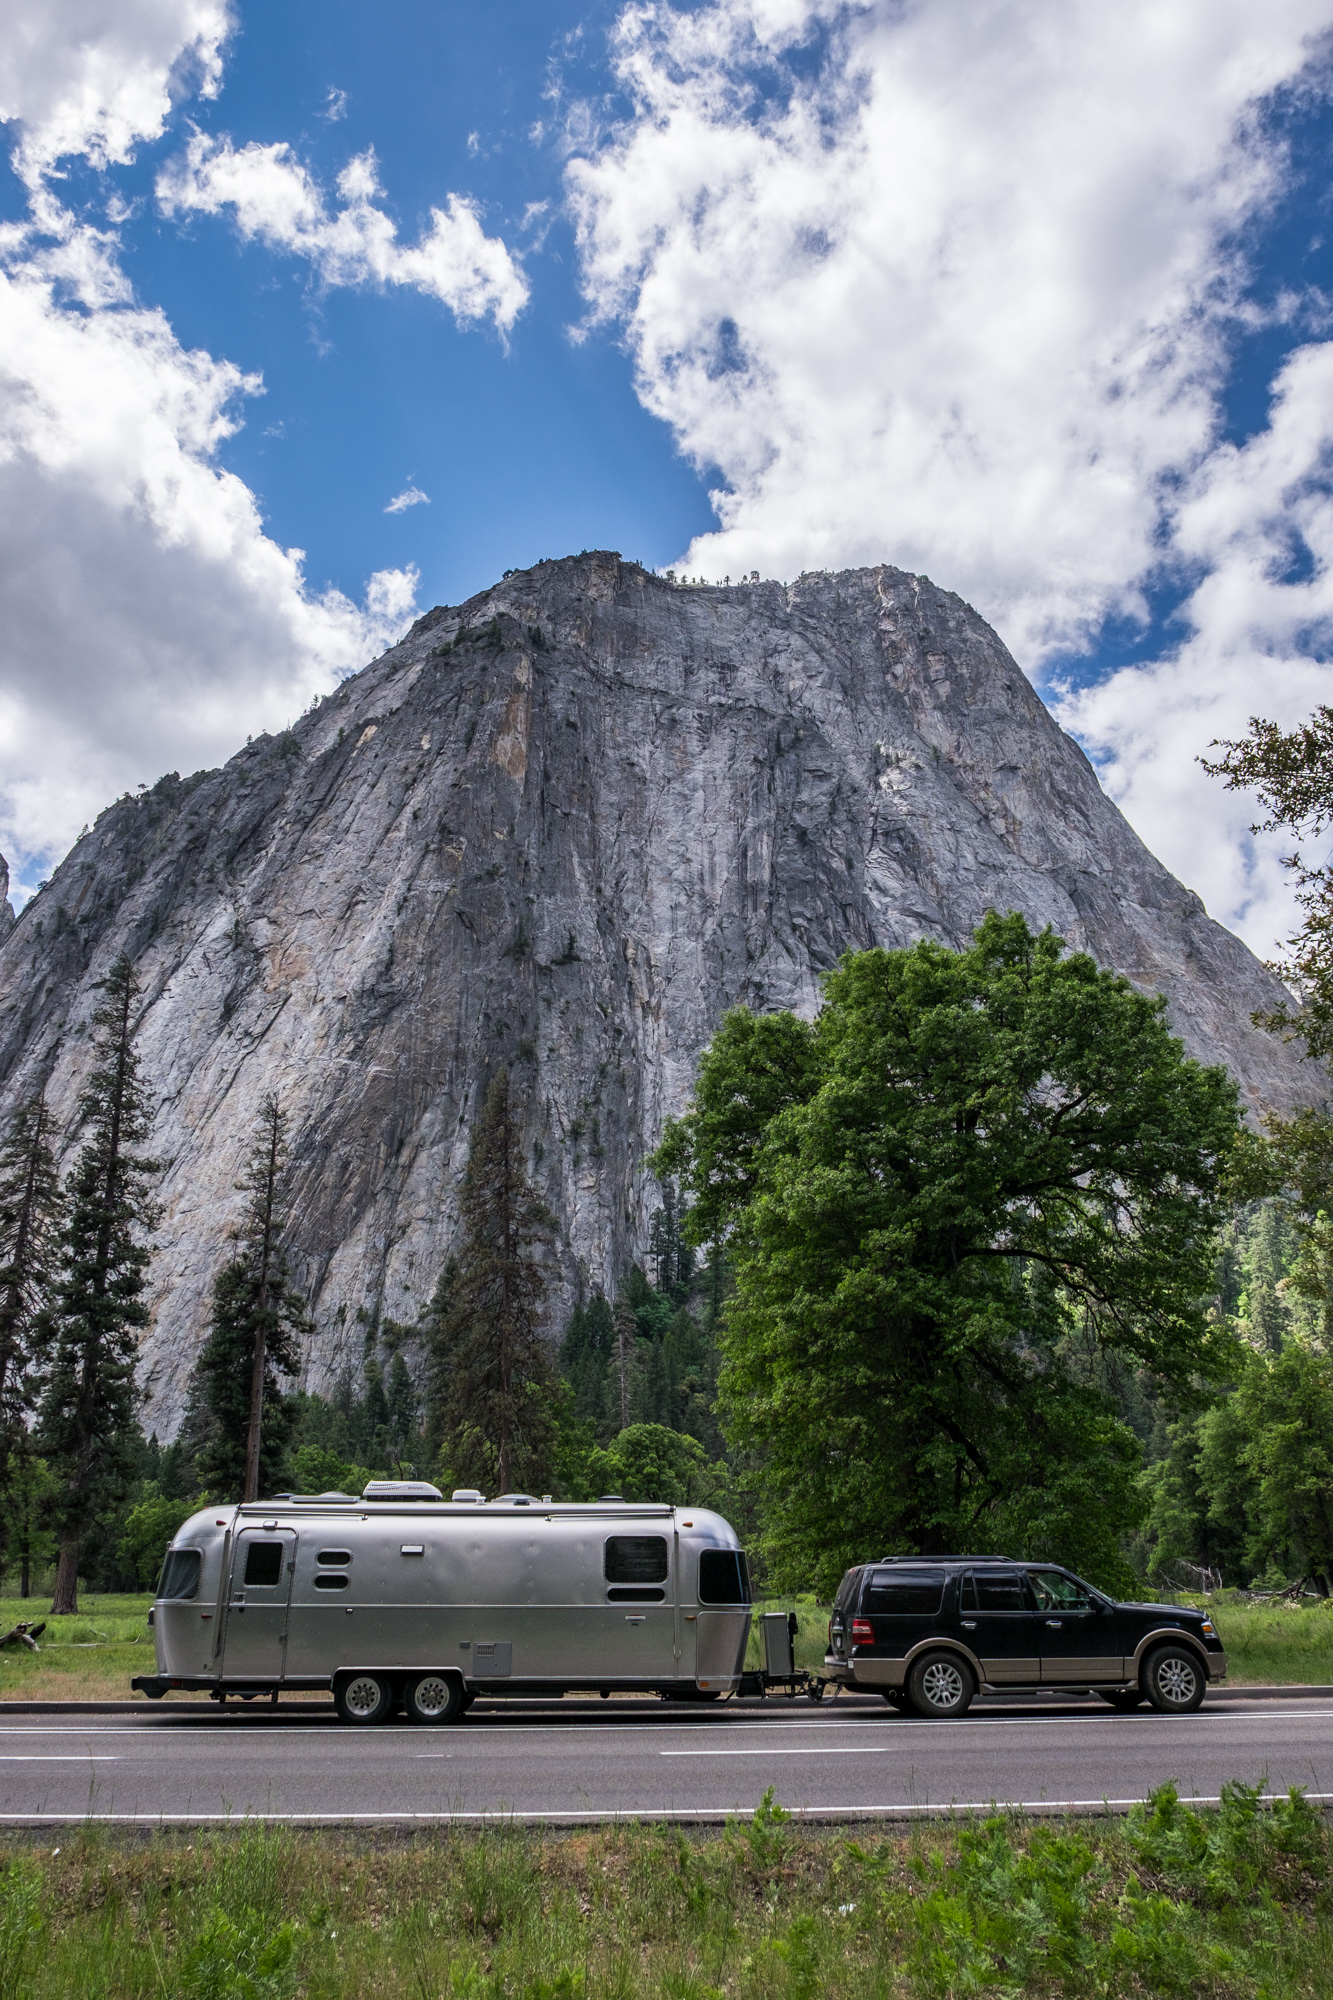 Whether a car is old or new, having a car insurance policy is a necessity. Yosemite National Park The Greatest American Road Trip